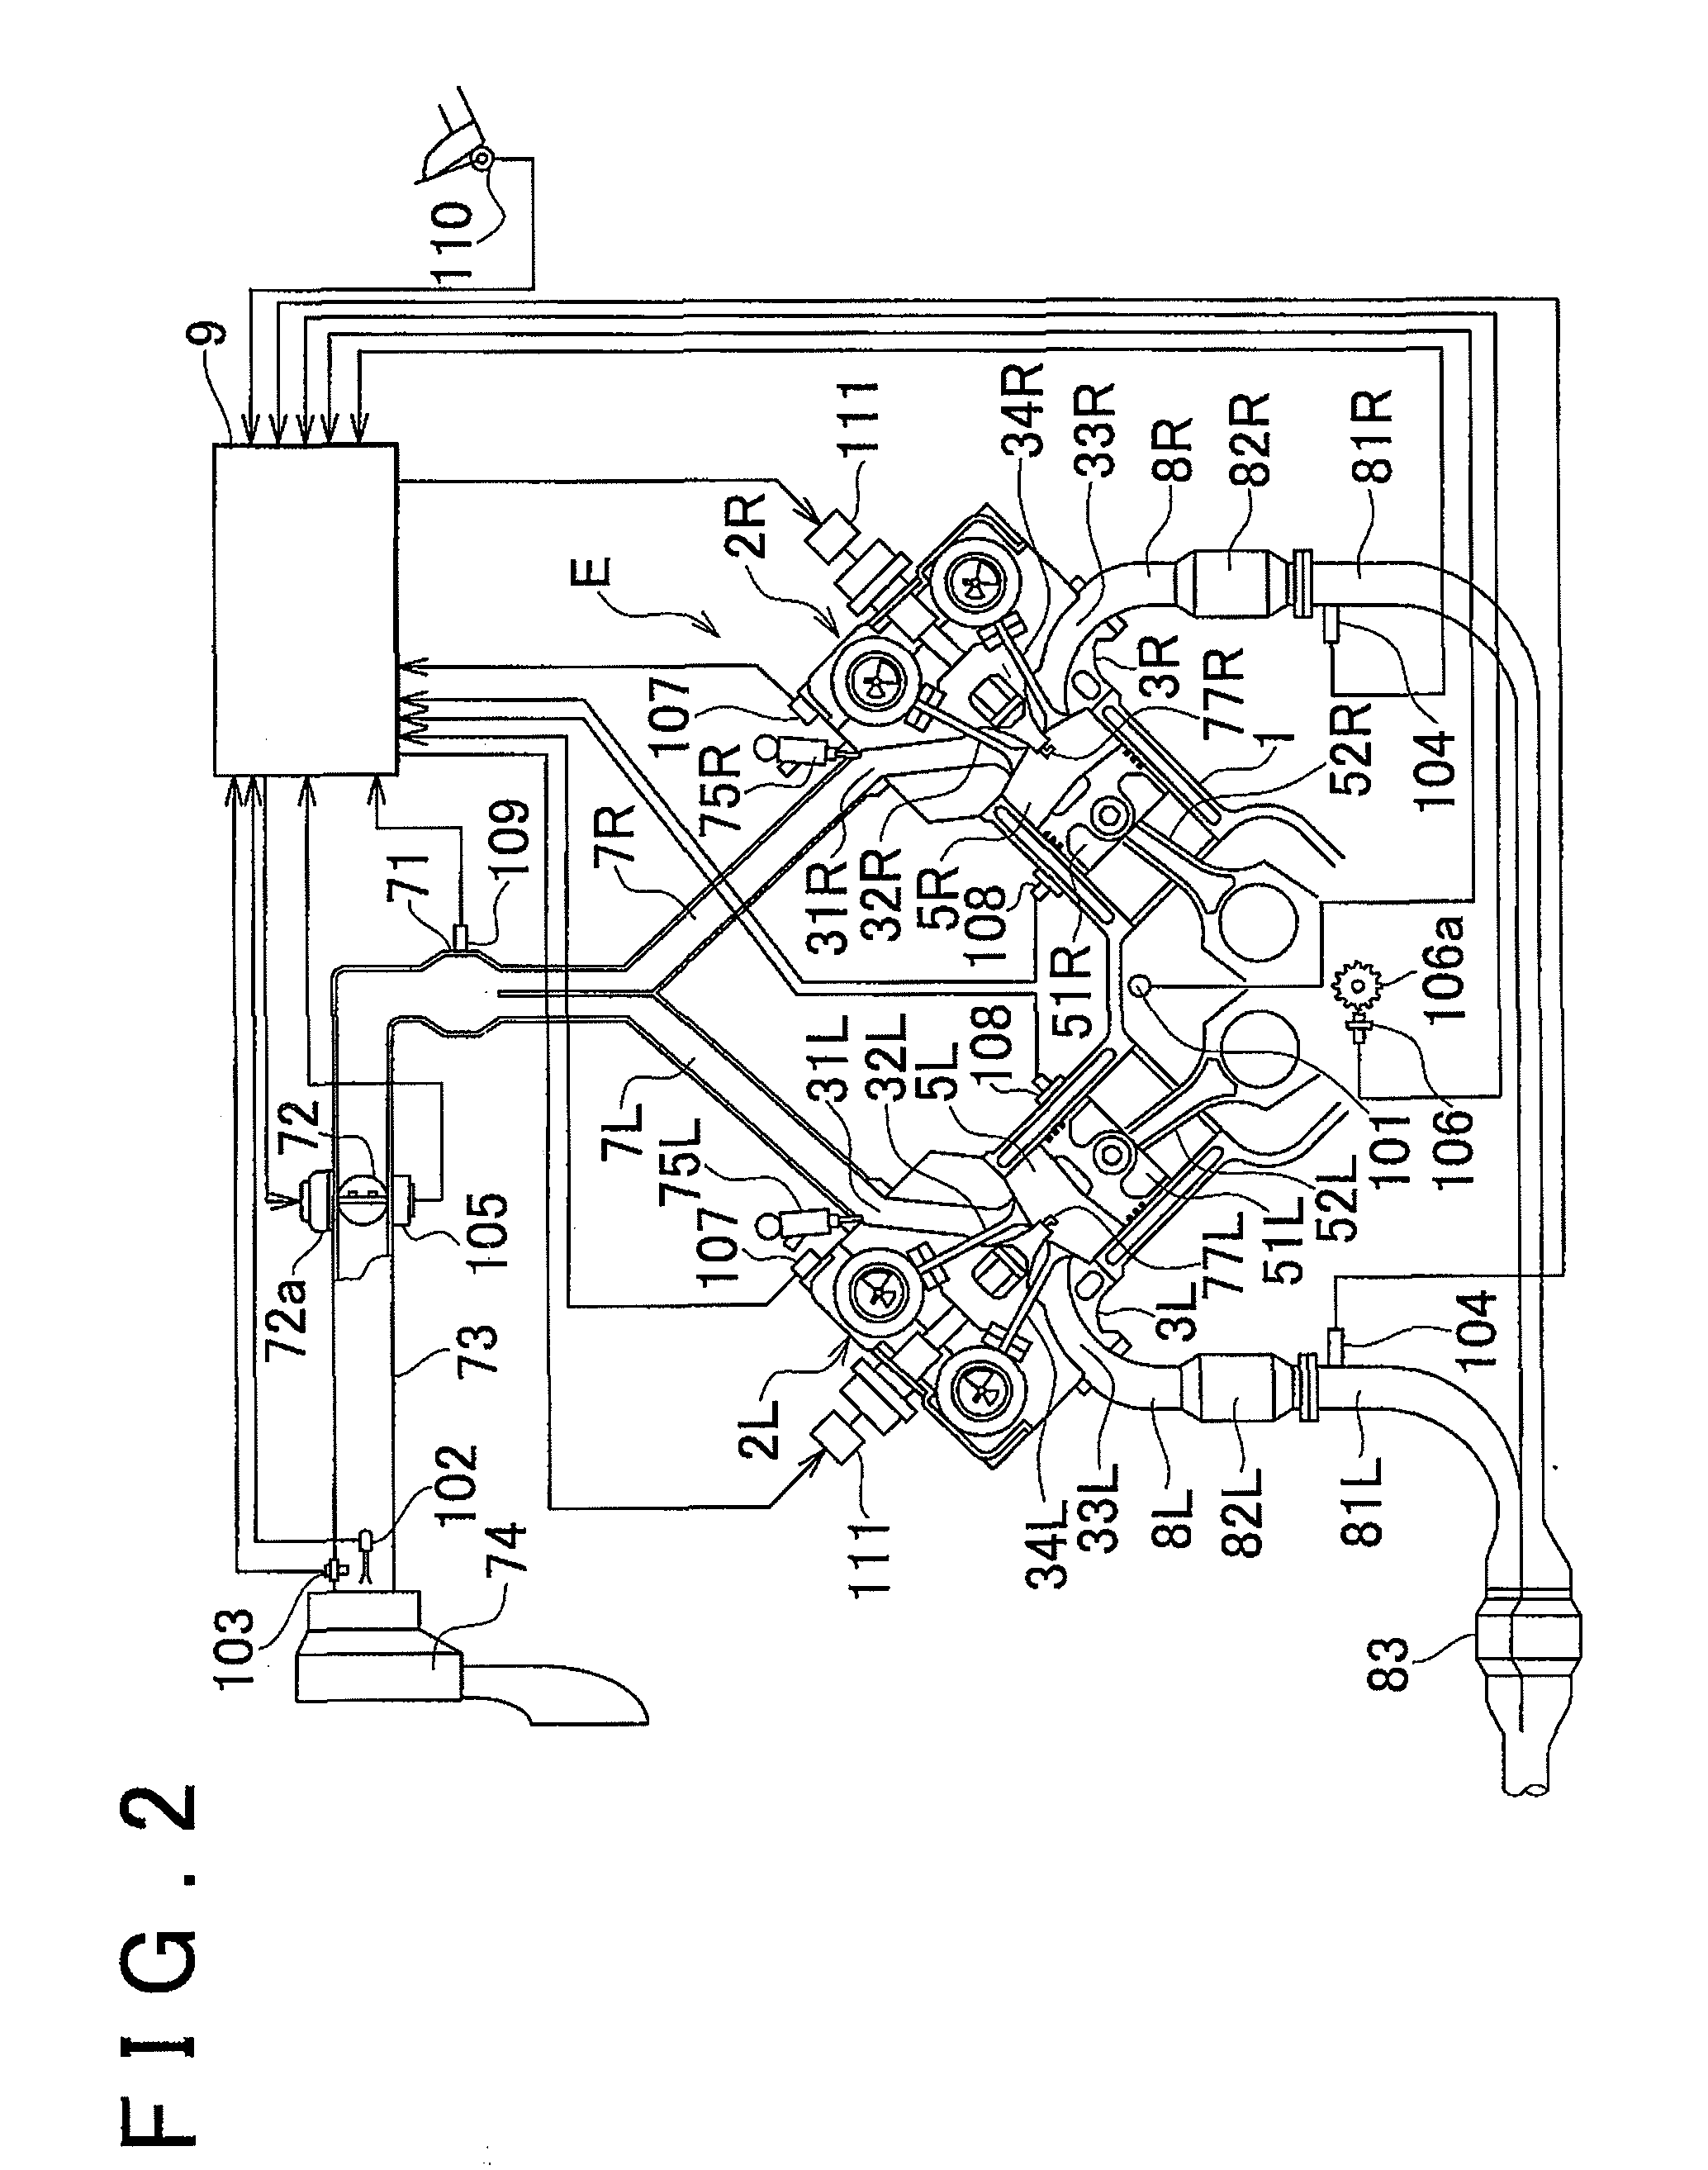 Ignition timing control apparatus and ignition timing control method for internal combustion engine